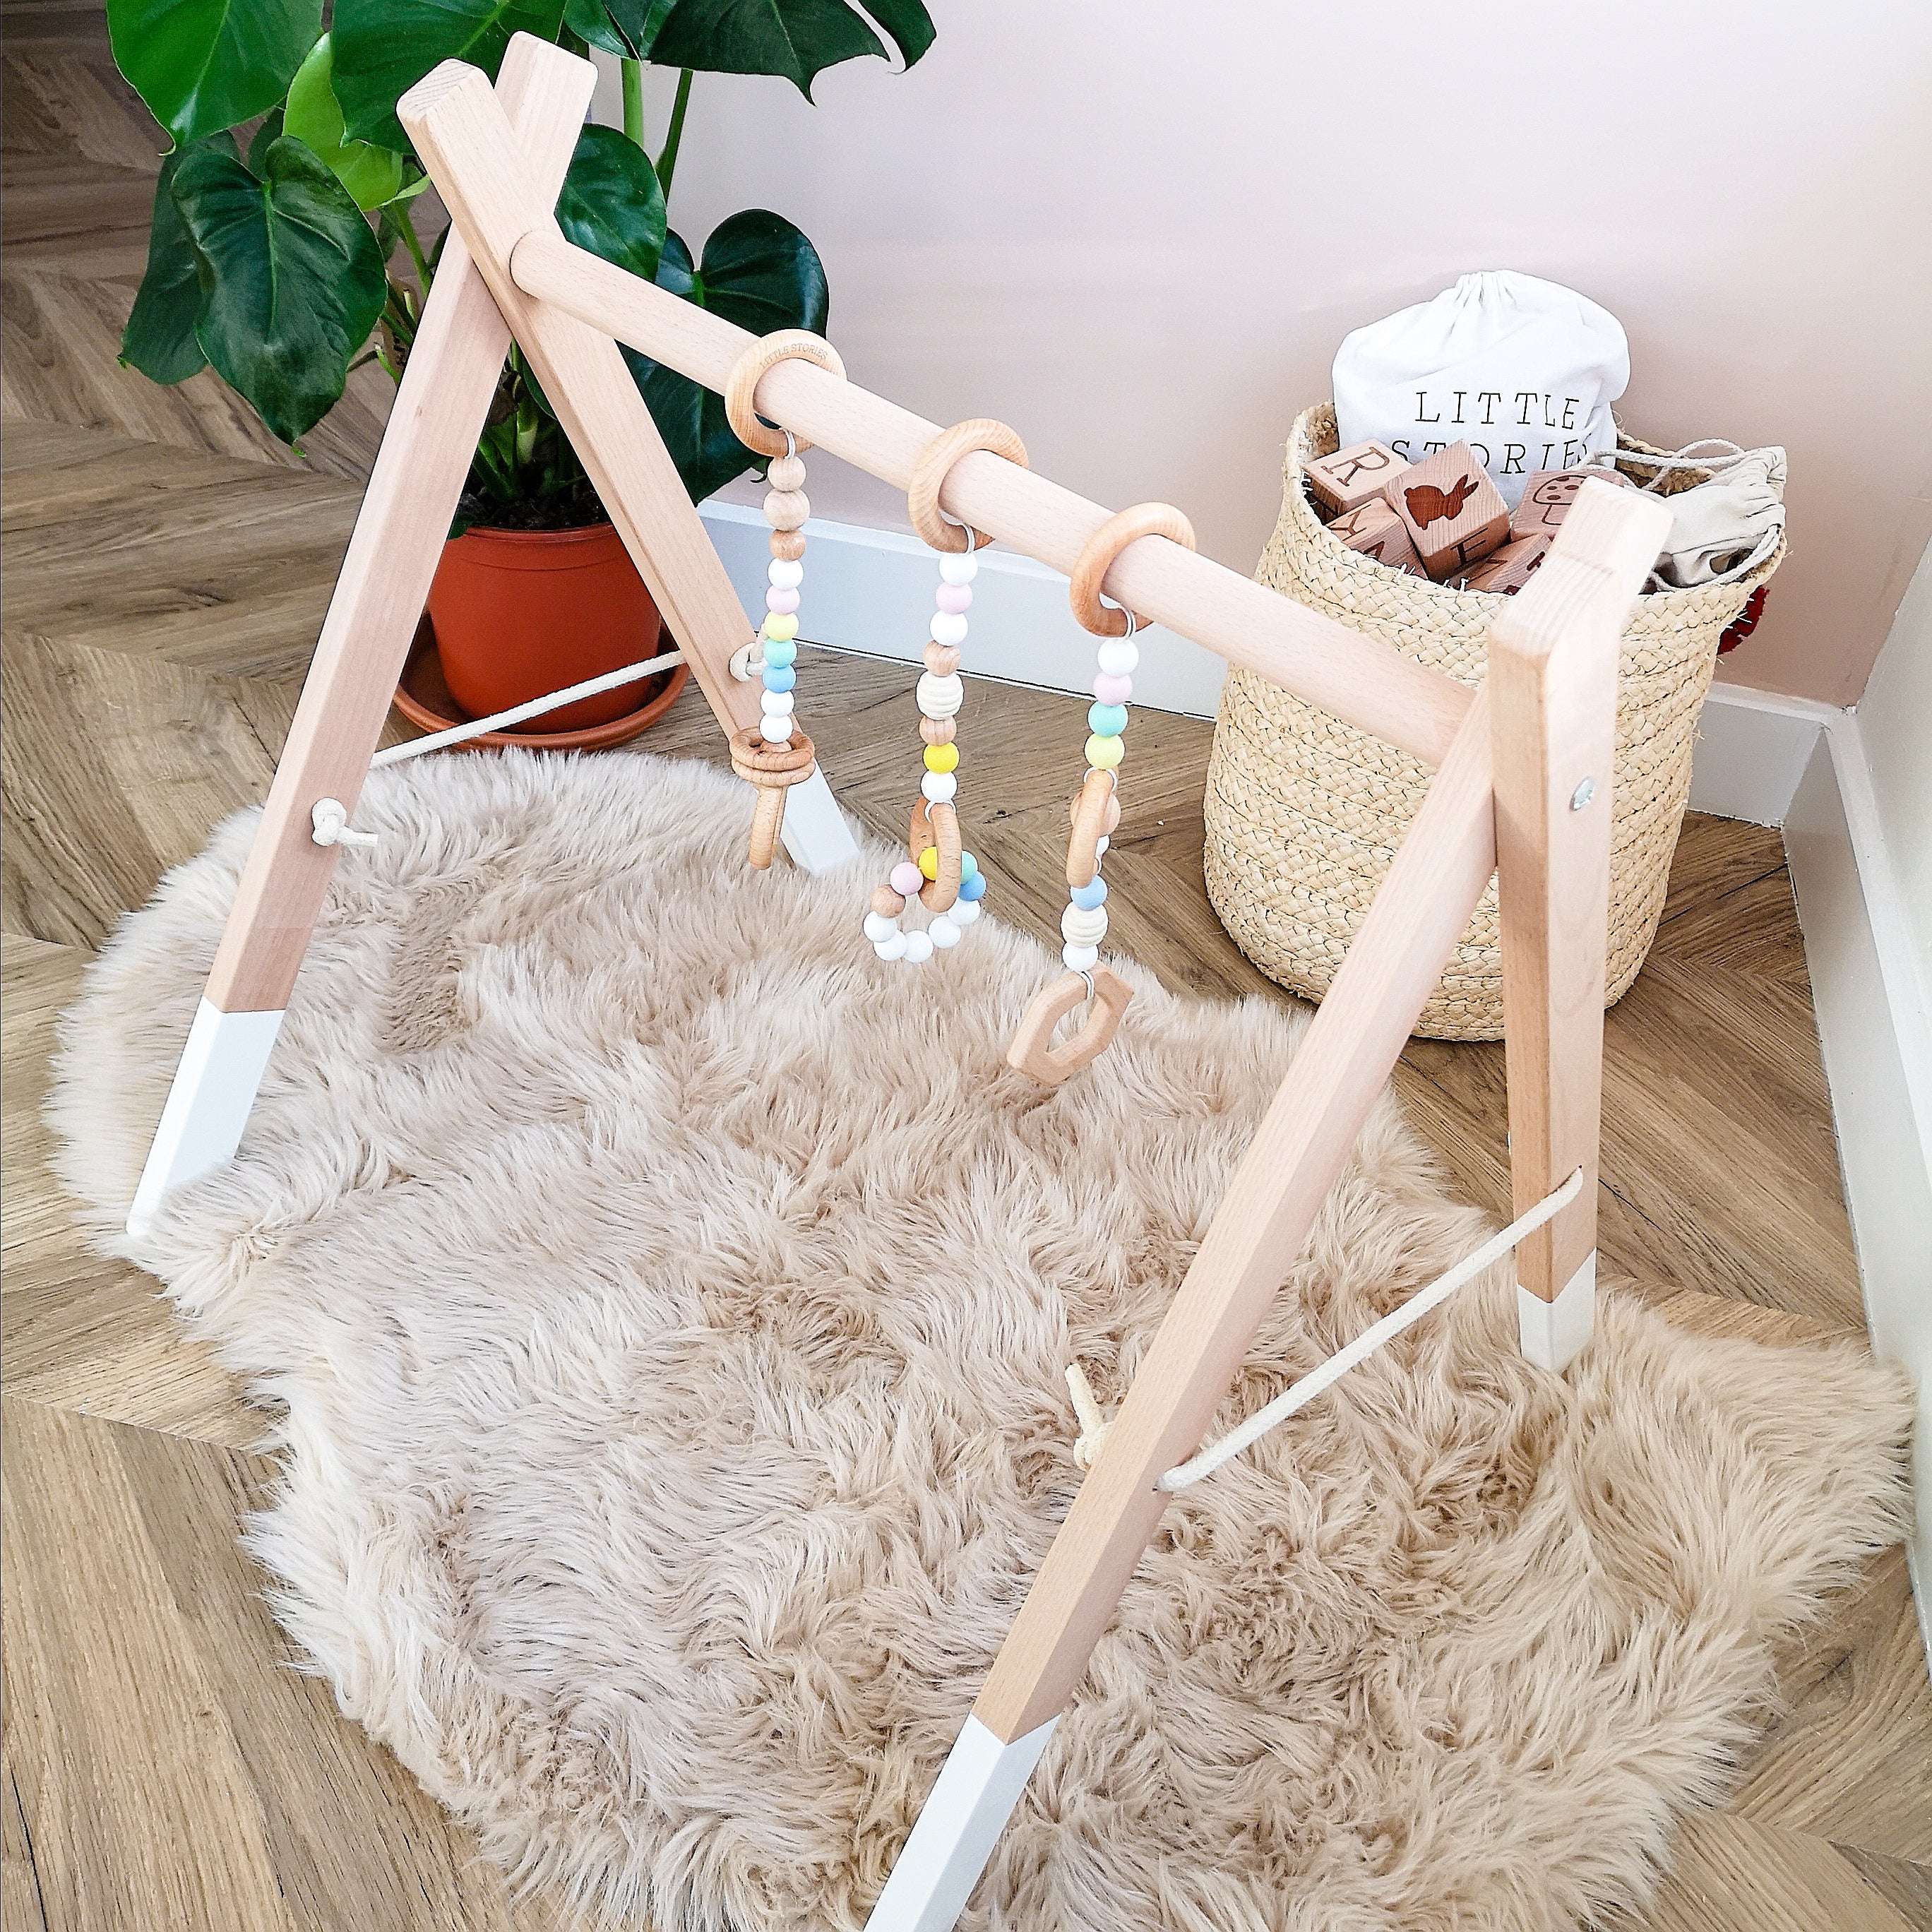 Little Stories | Beech Wood Play Gym With Pastel Charm - Moo Like a Monkey